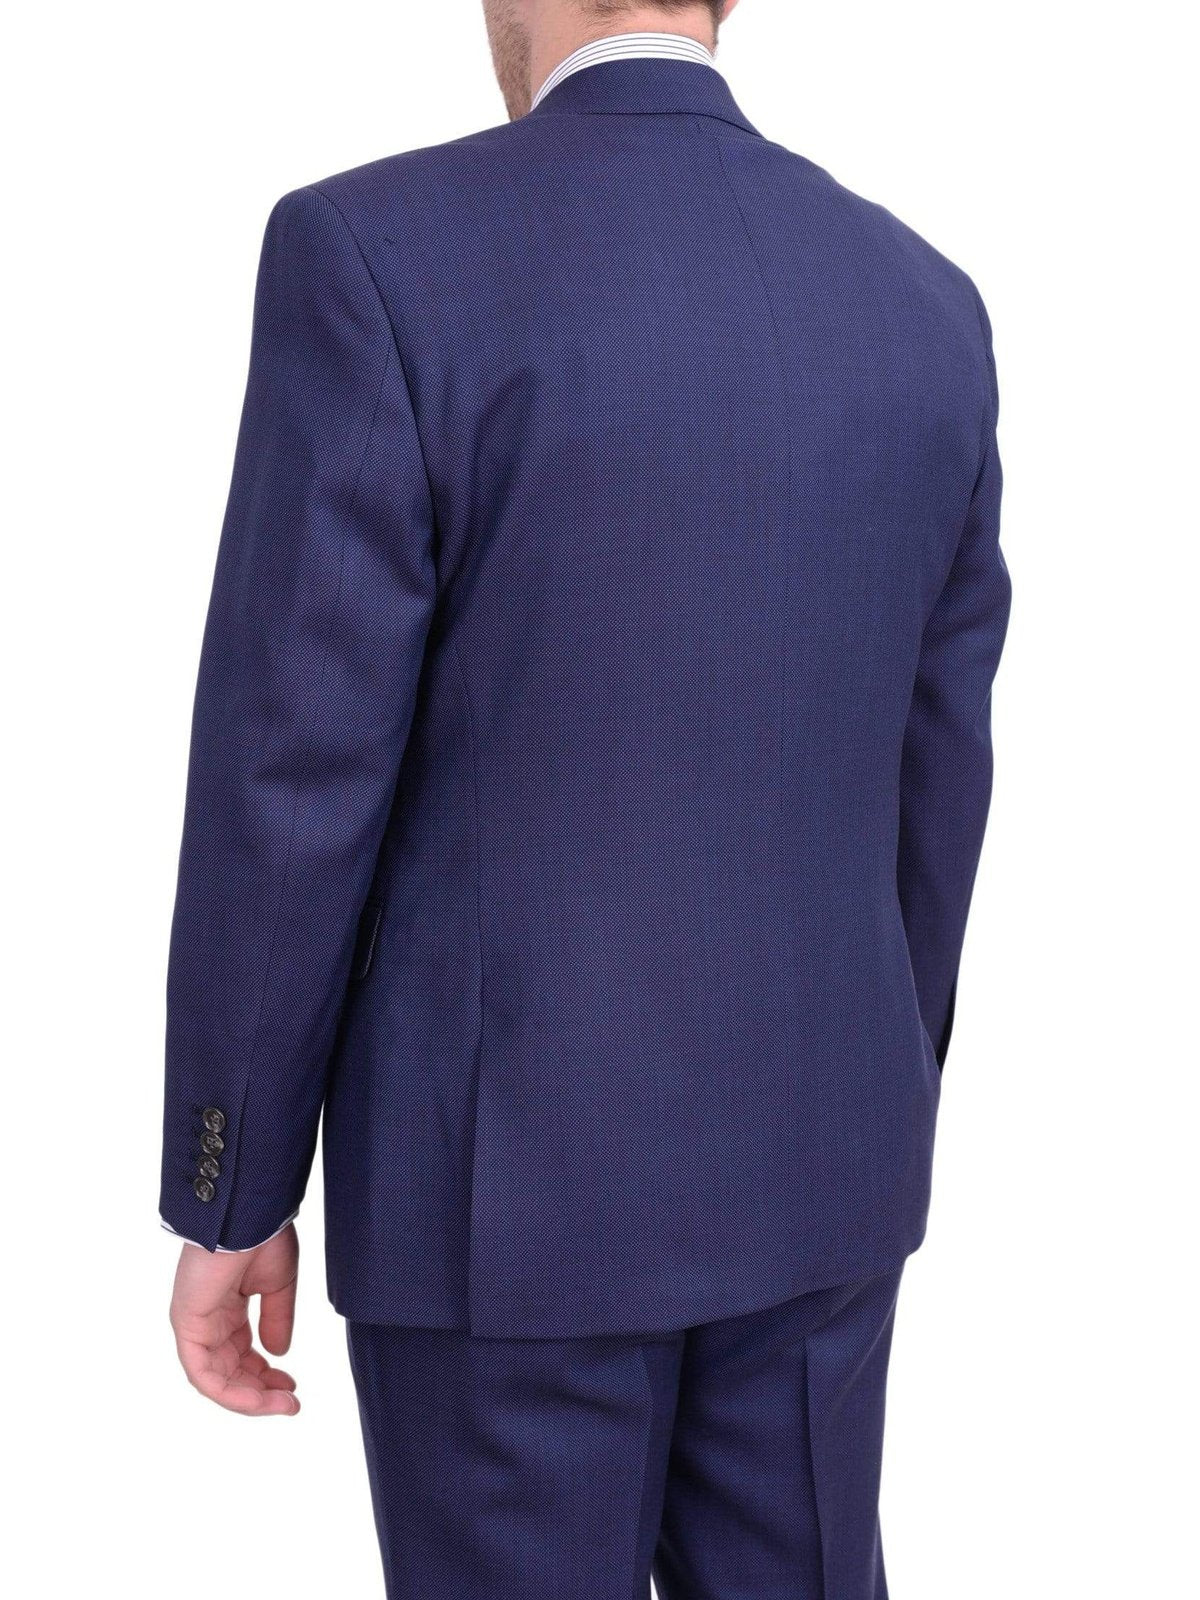 I Uomo TWO PIECE SUITS I Uomo Mens Regular Fit Blue Nailhead Two Button Wool Suit